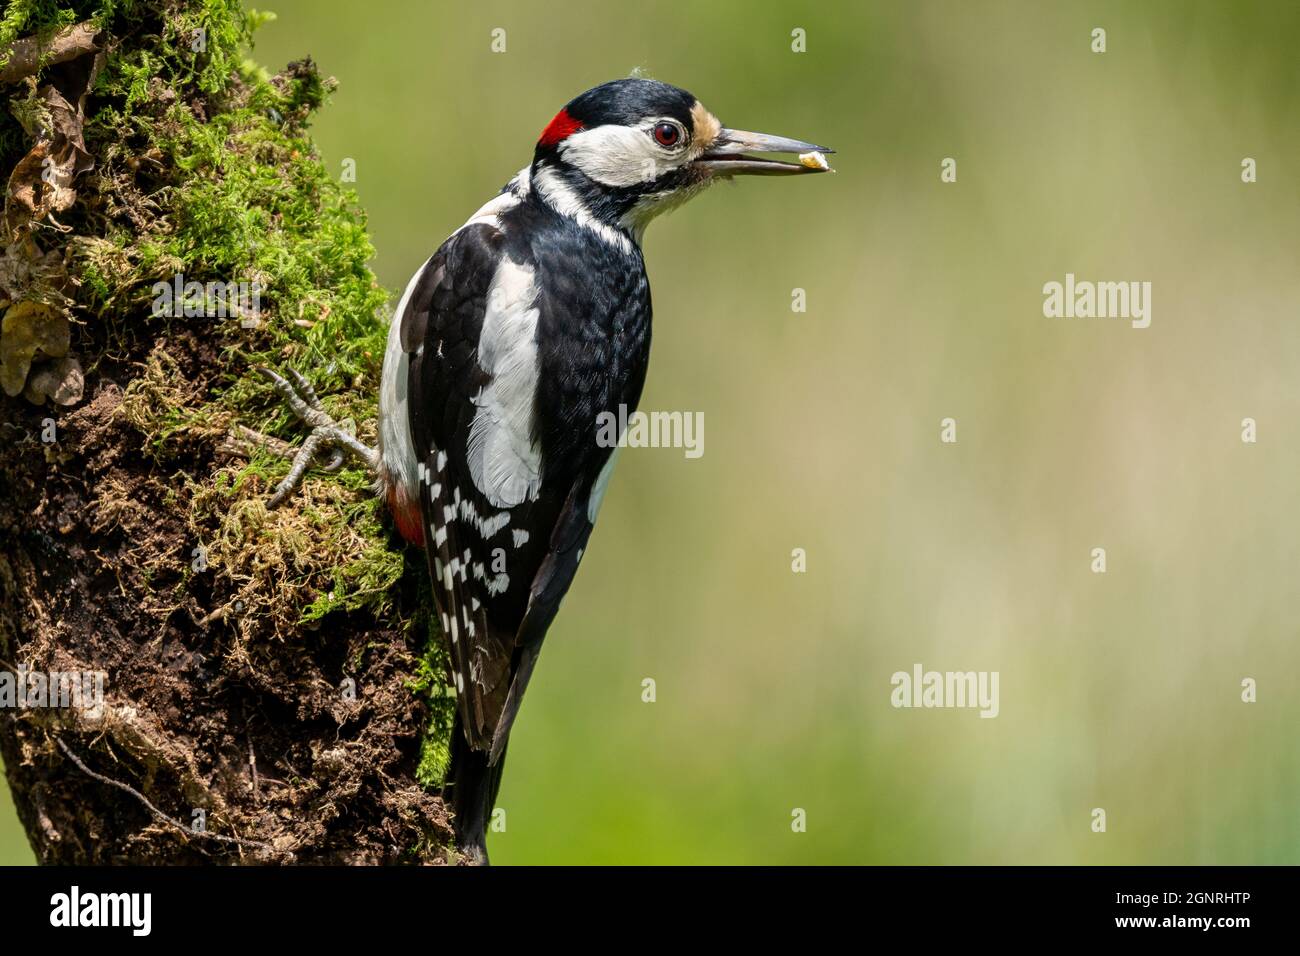 Male Great spotted Woodpecker perched on a moss covered tree trunk Stock Photo